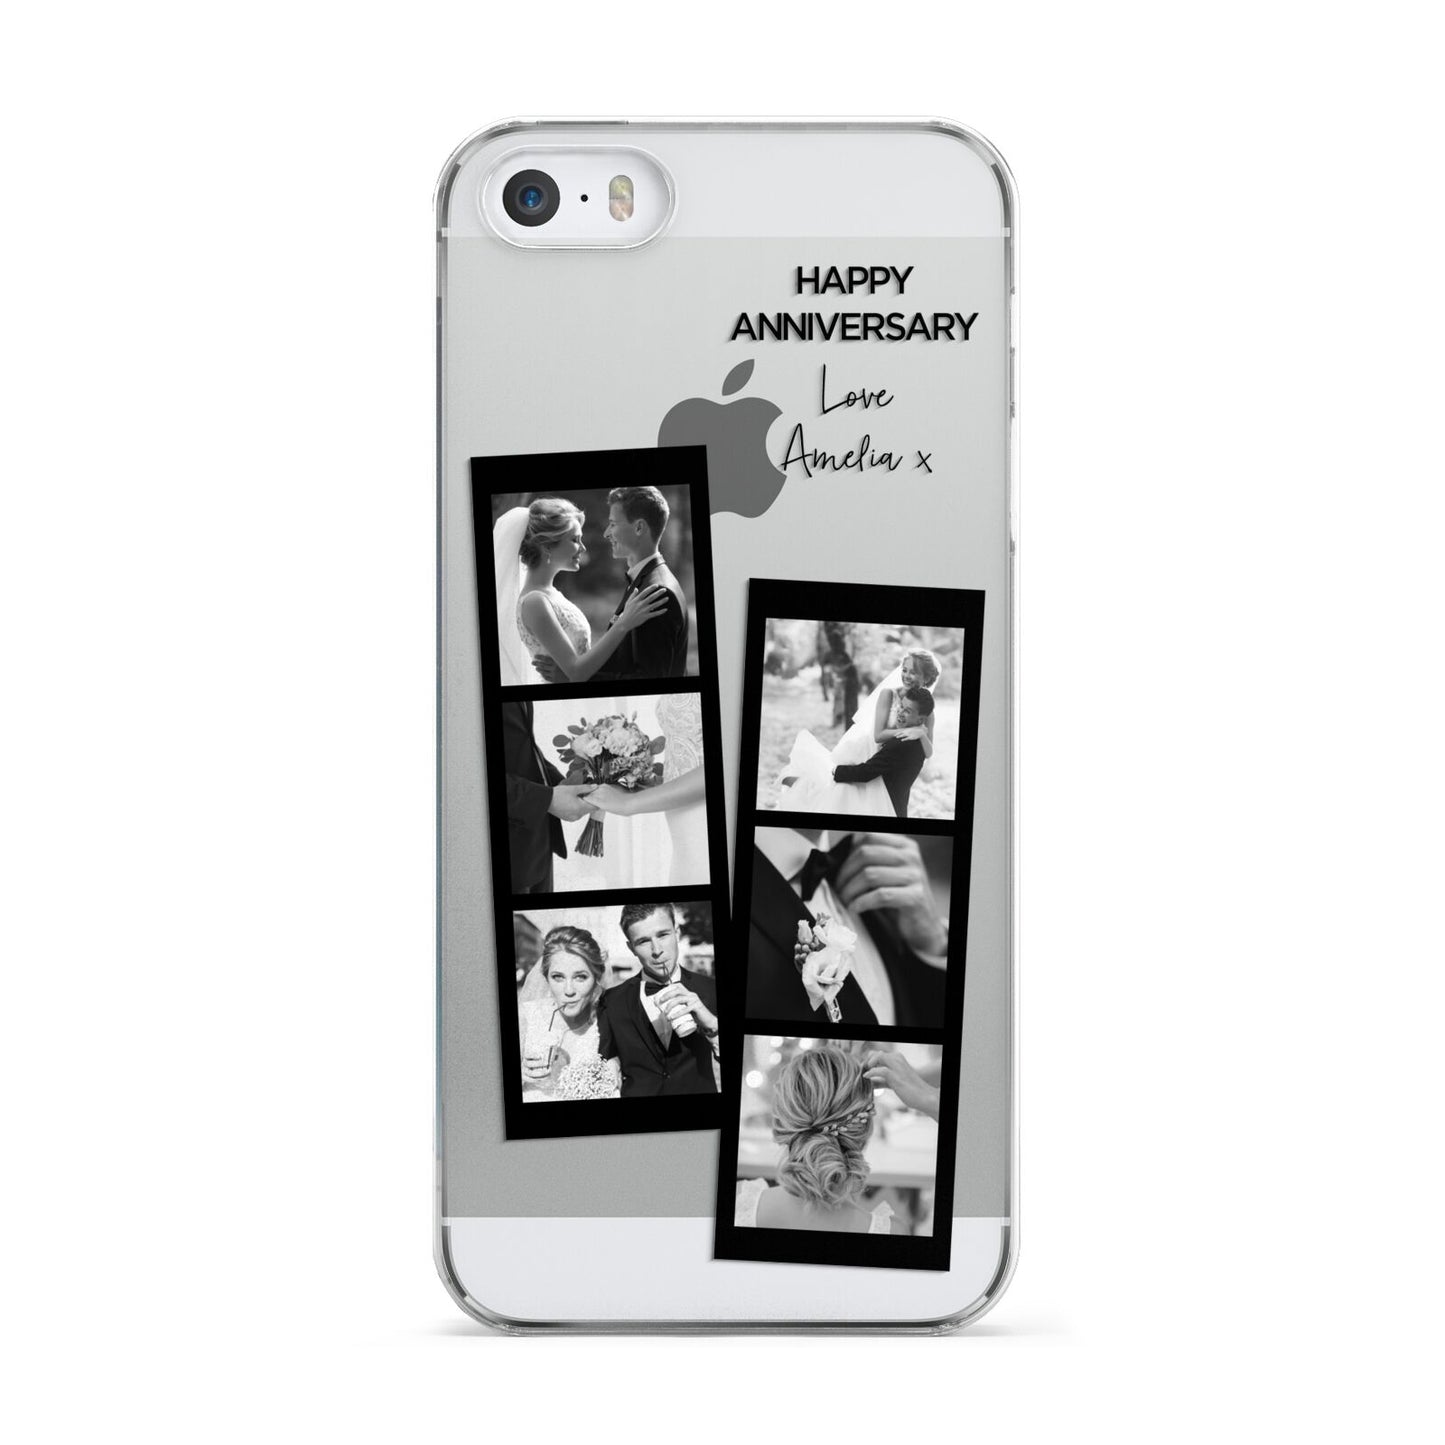 Monochrome Anniversary Photo Strip with Name Apple iPhone 5 Case